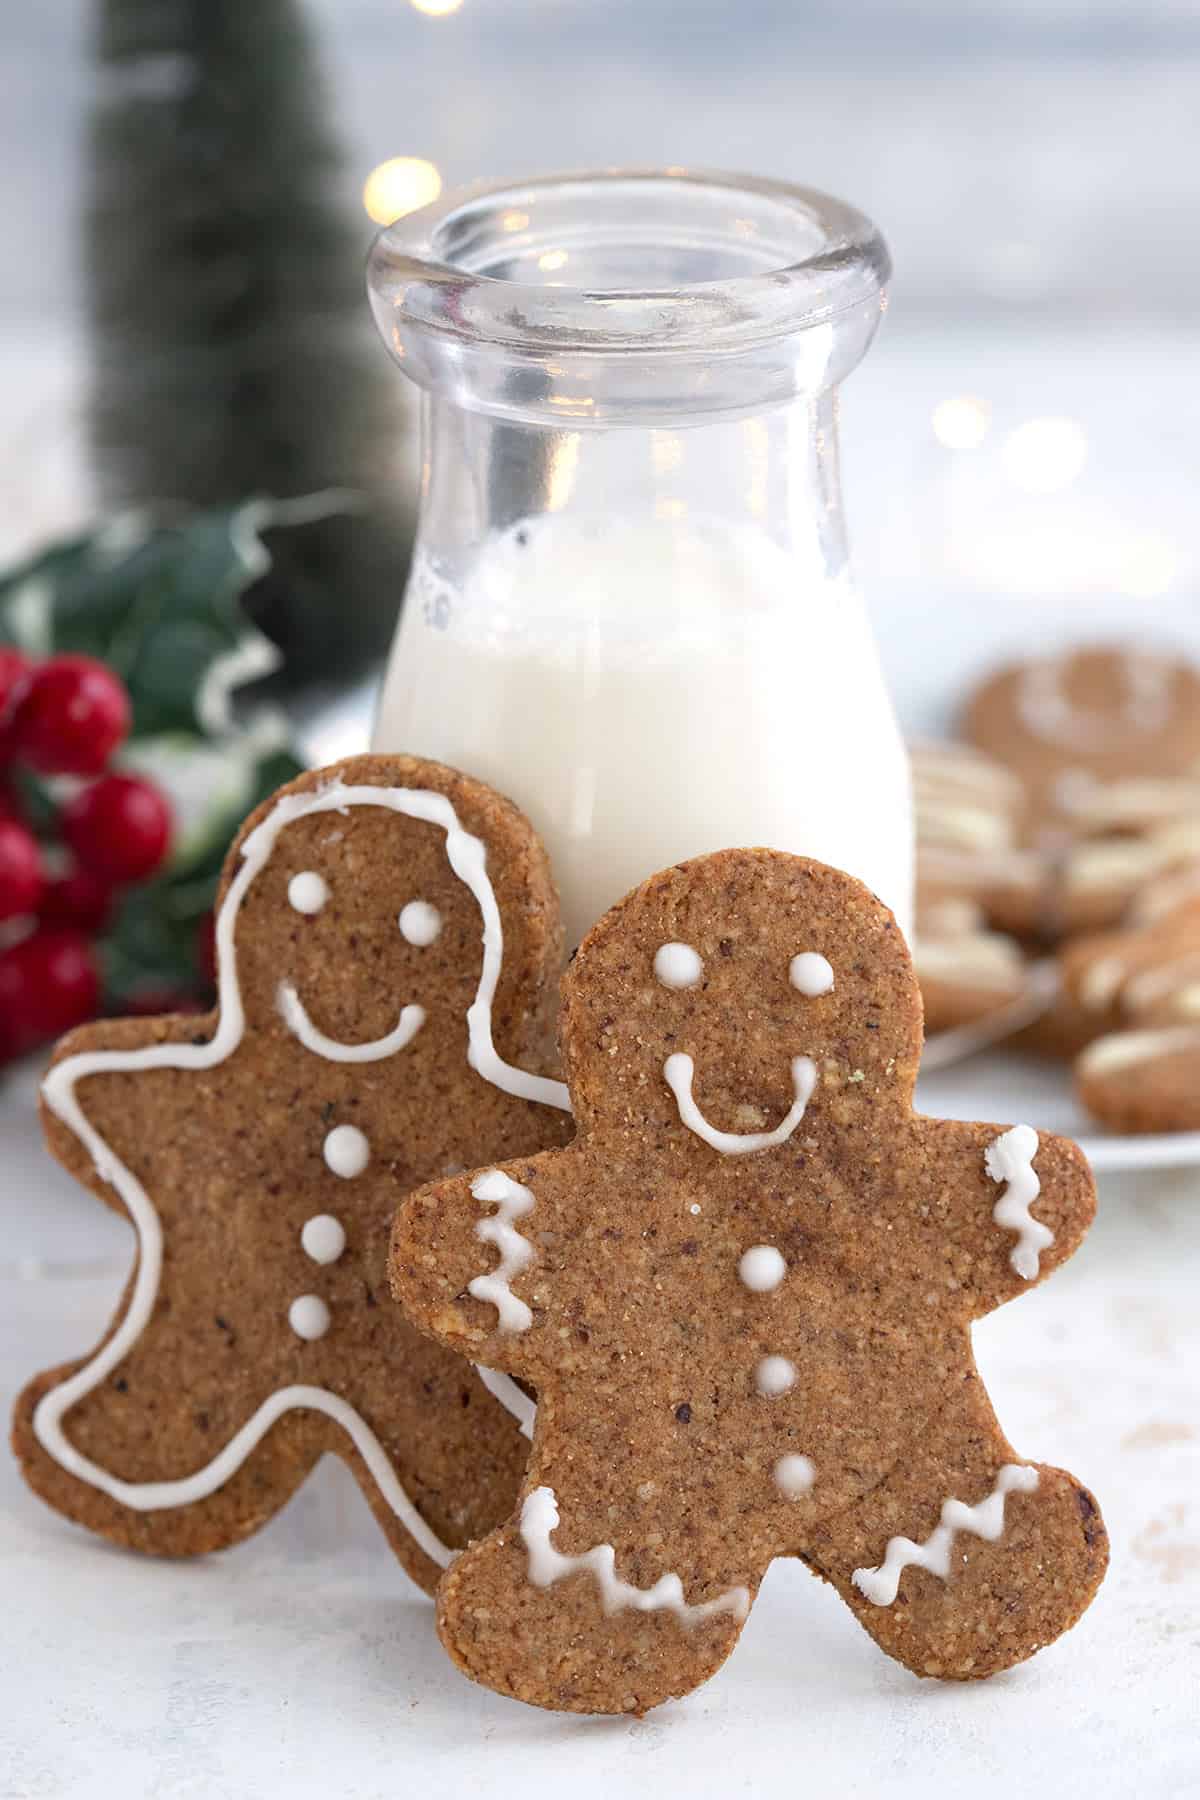 Two keto gingerbread cookies leaning up against a glass bottle of milk, with more cookies and Christmas decorations in the background.